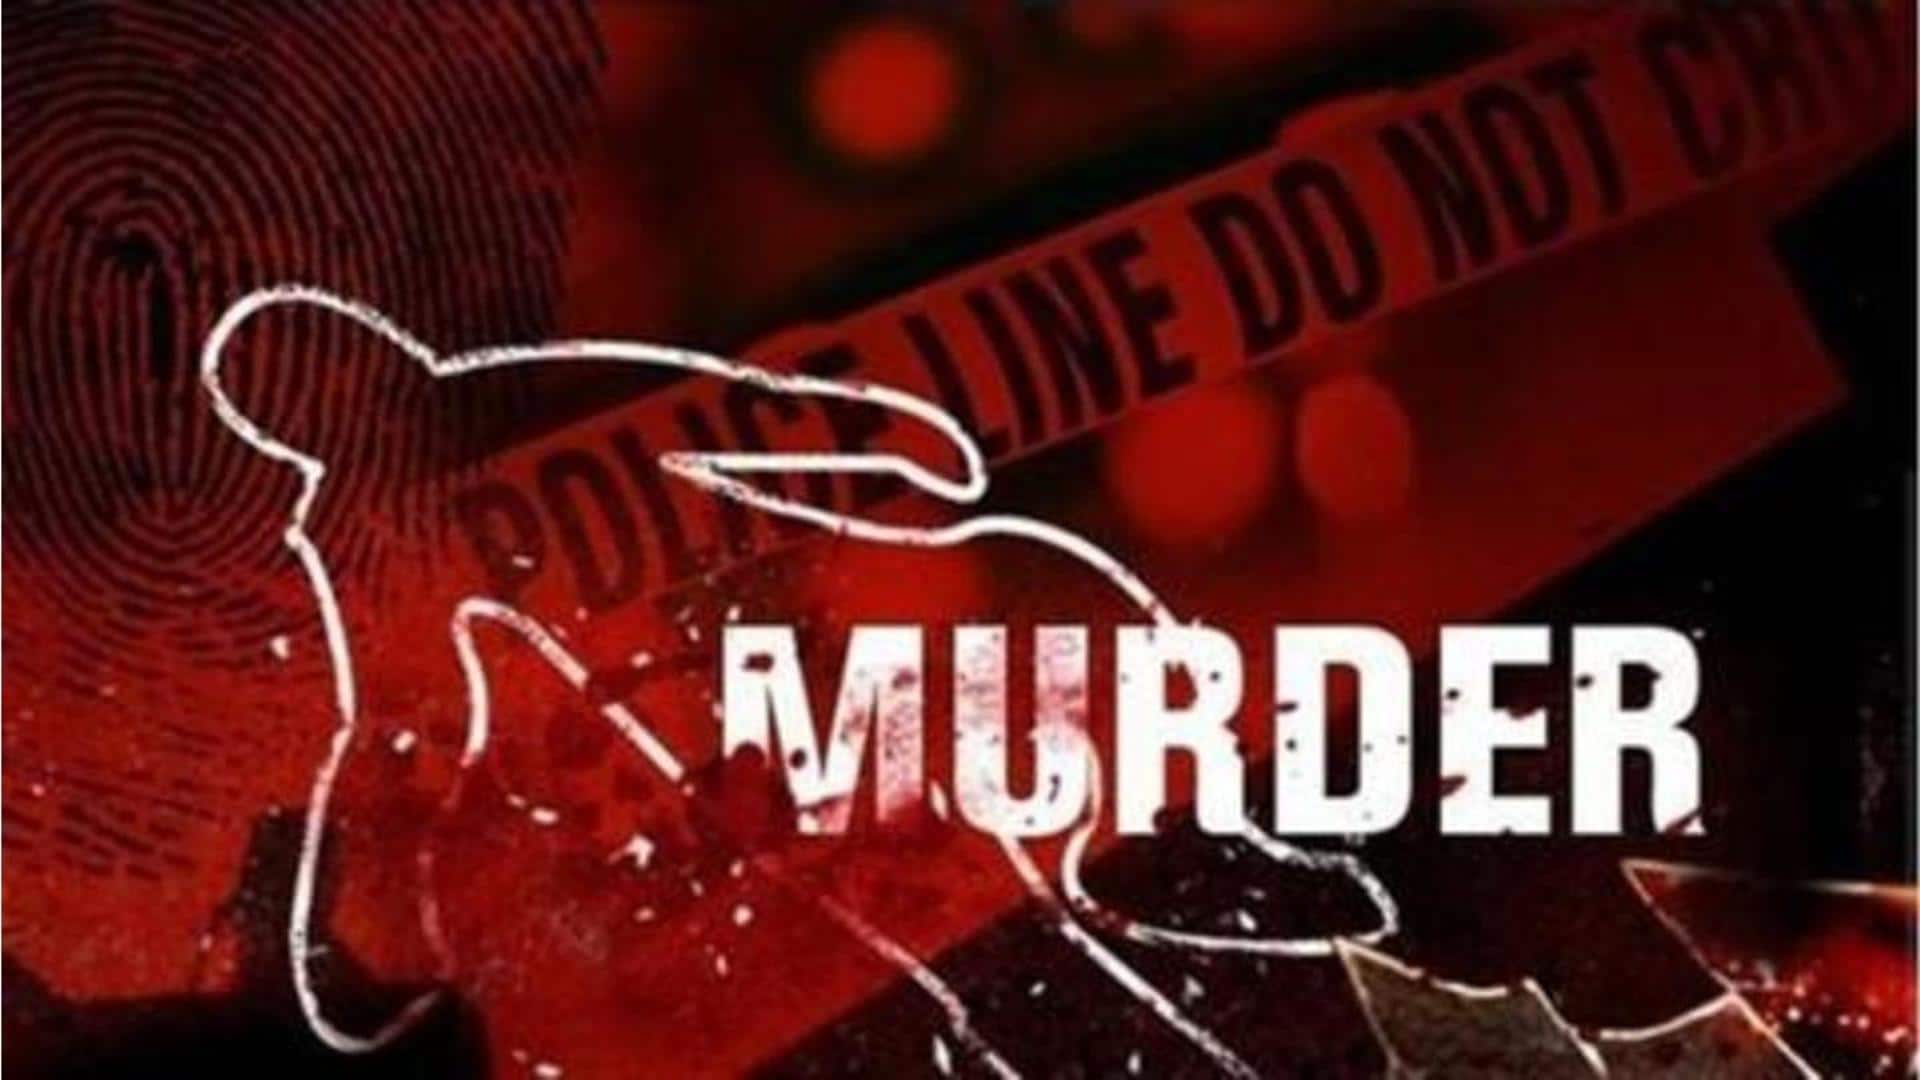 Delhi: 22-year-old allegedly killed by flatmate hours after party